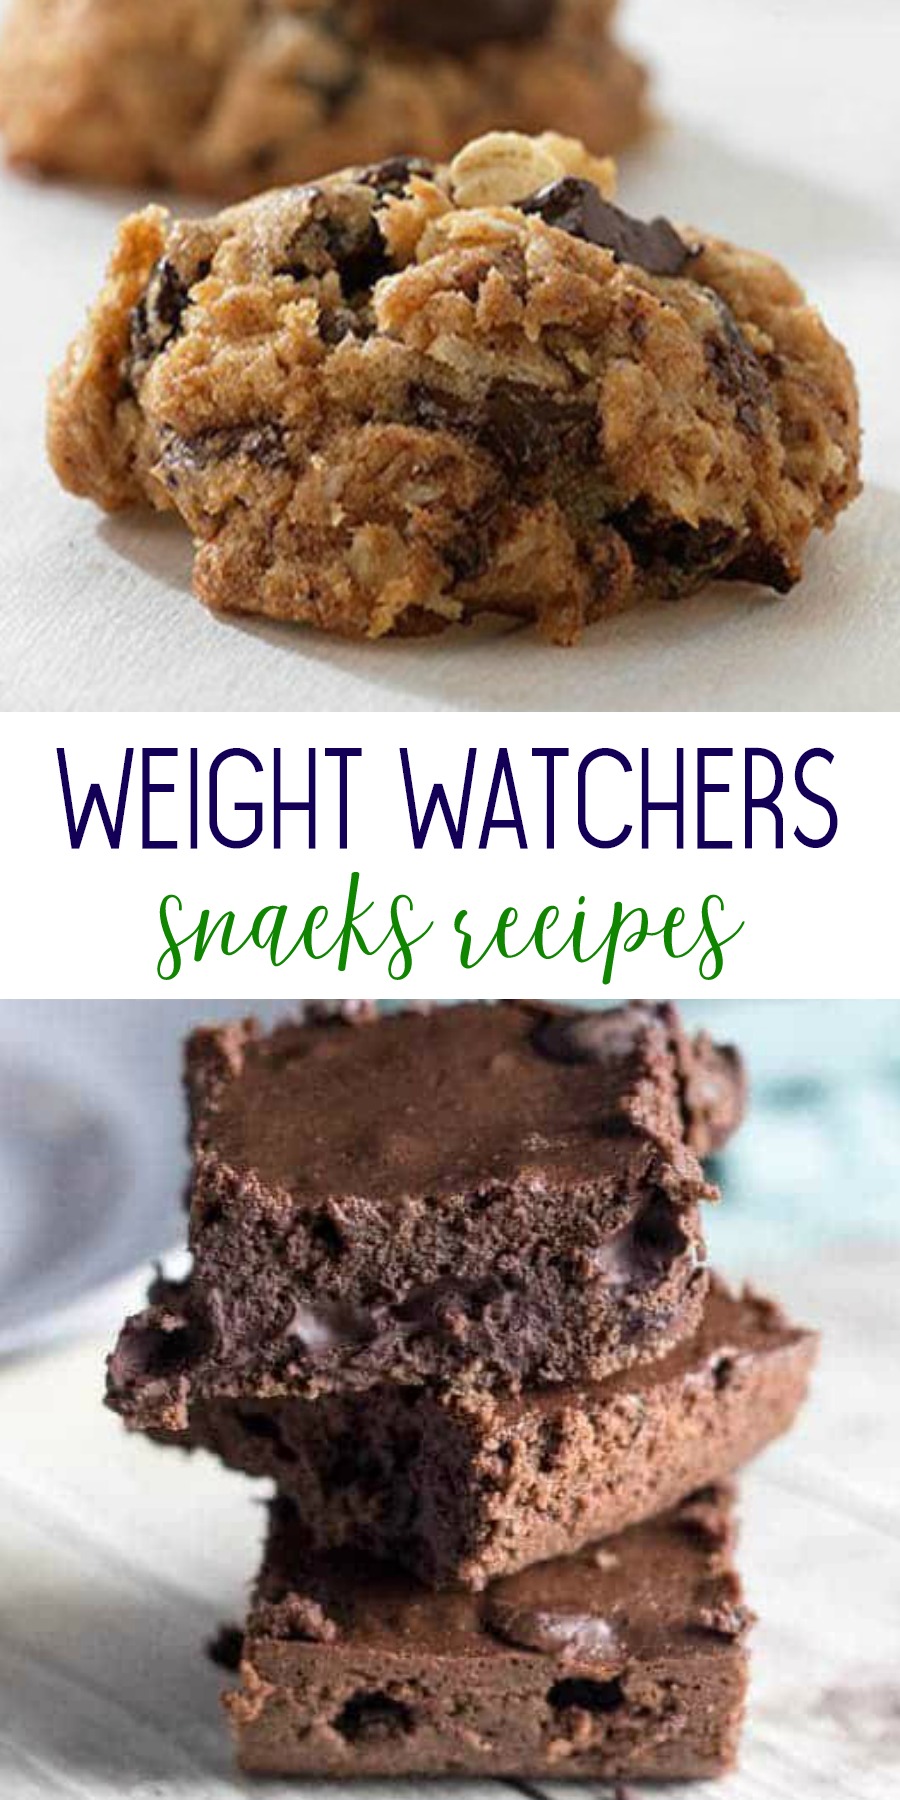 Weight Watchers cookies brownies and muffins